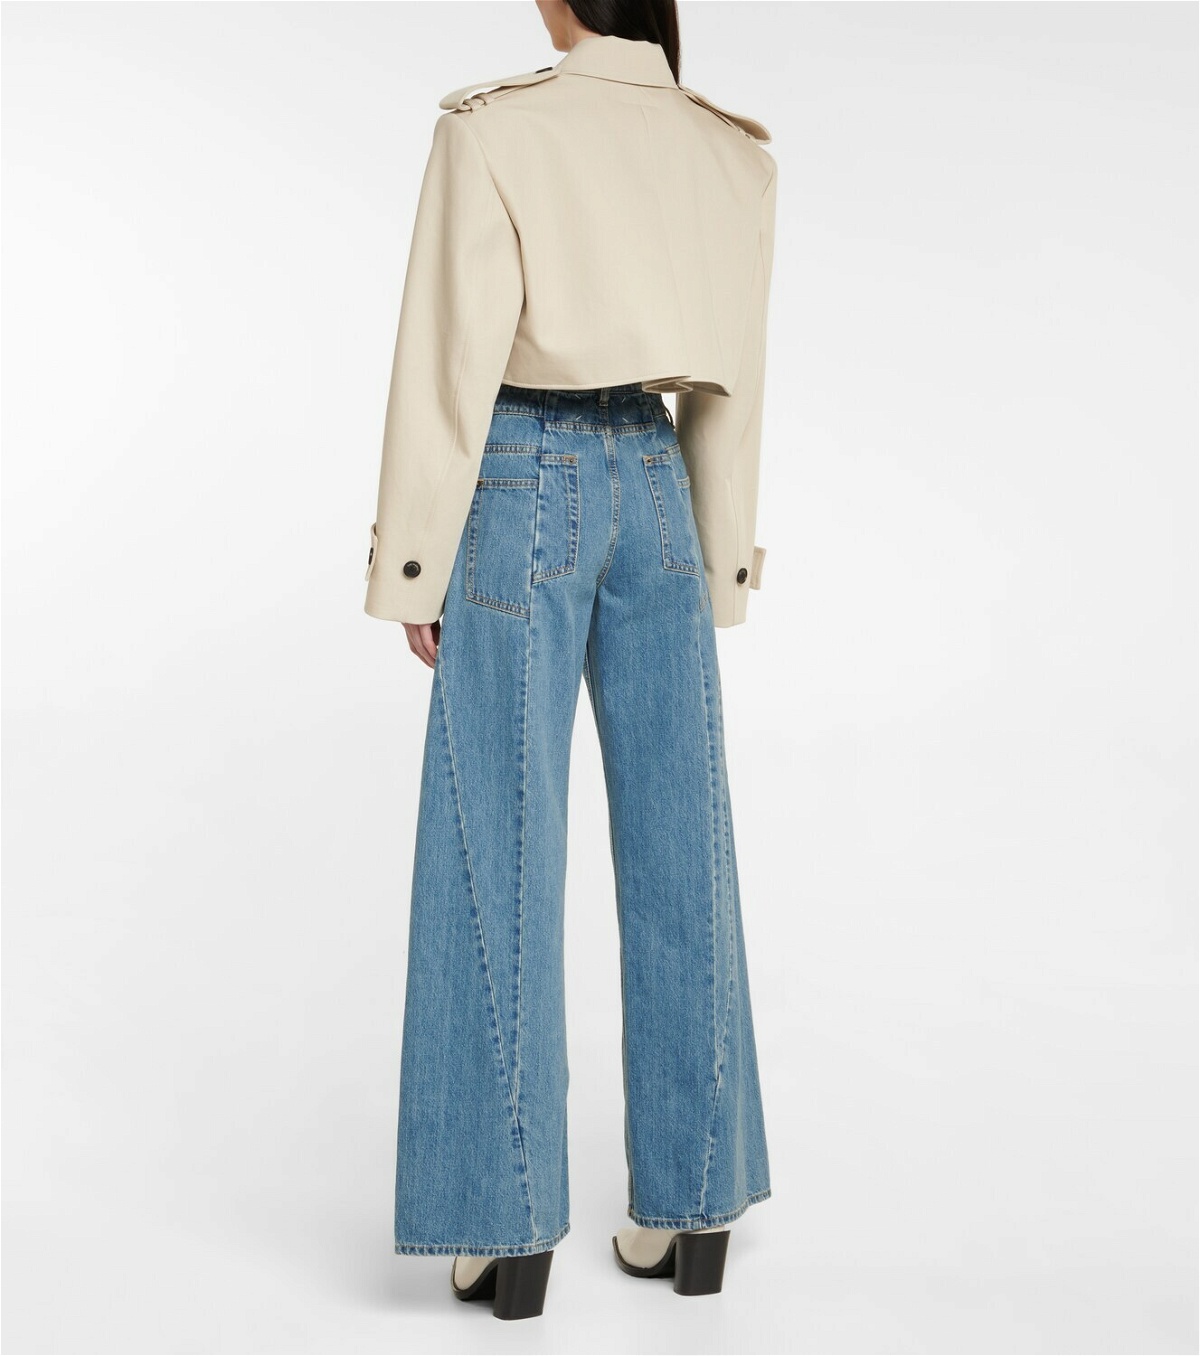 The Mannei Mahis cropped cotton biker jacket